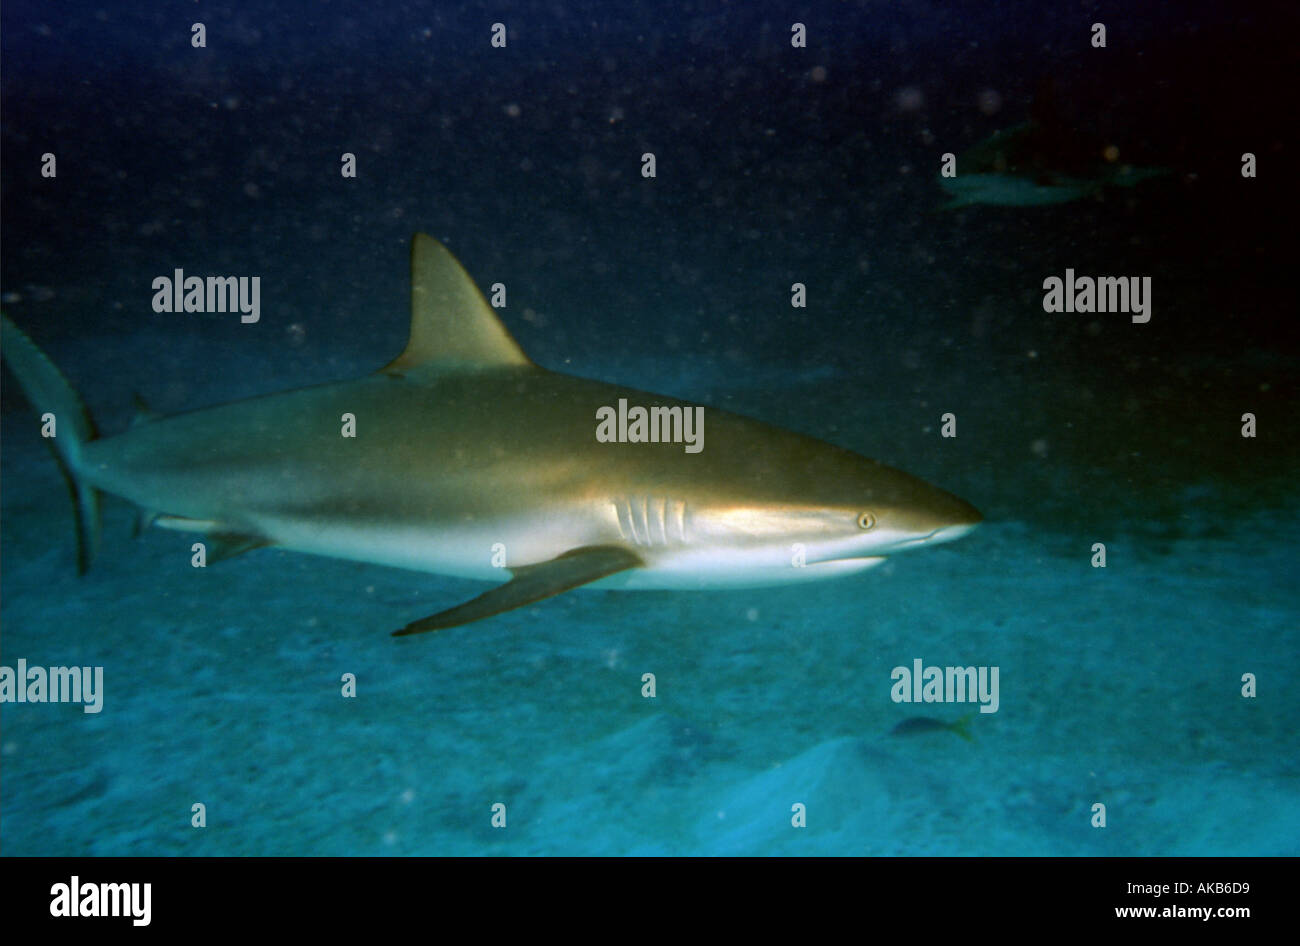 This denizen of the deep with customary gill slits pointed snout and distinctive dorsal fin is a gray Caribbean reef shark Stock Photo